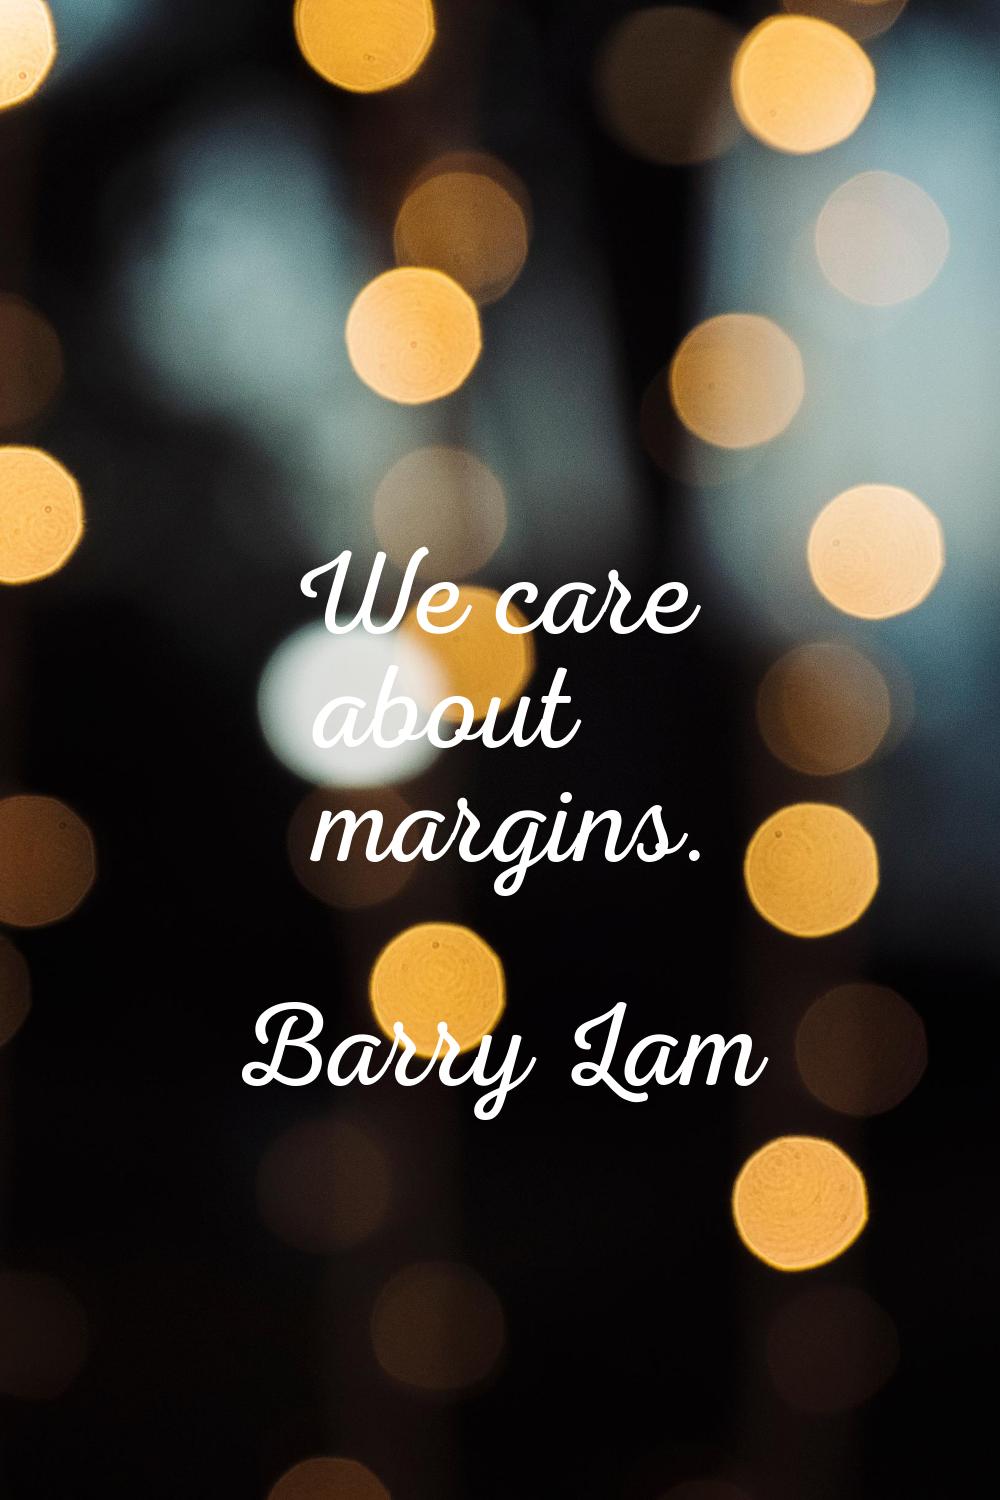 We care about margins.